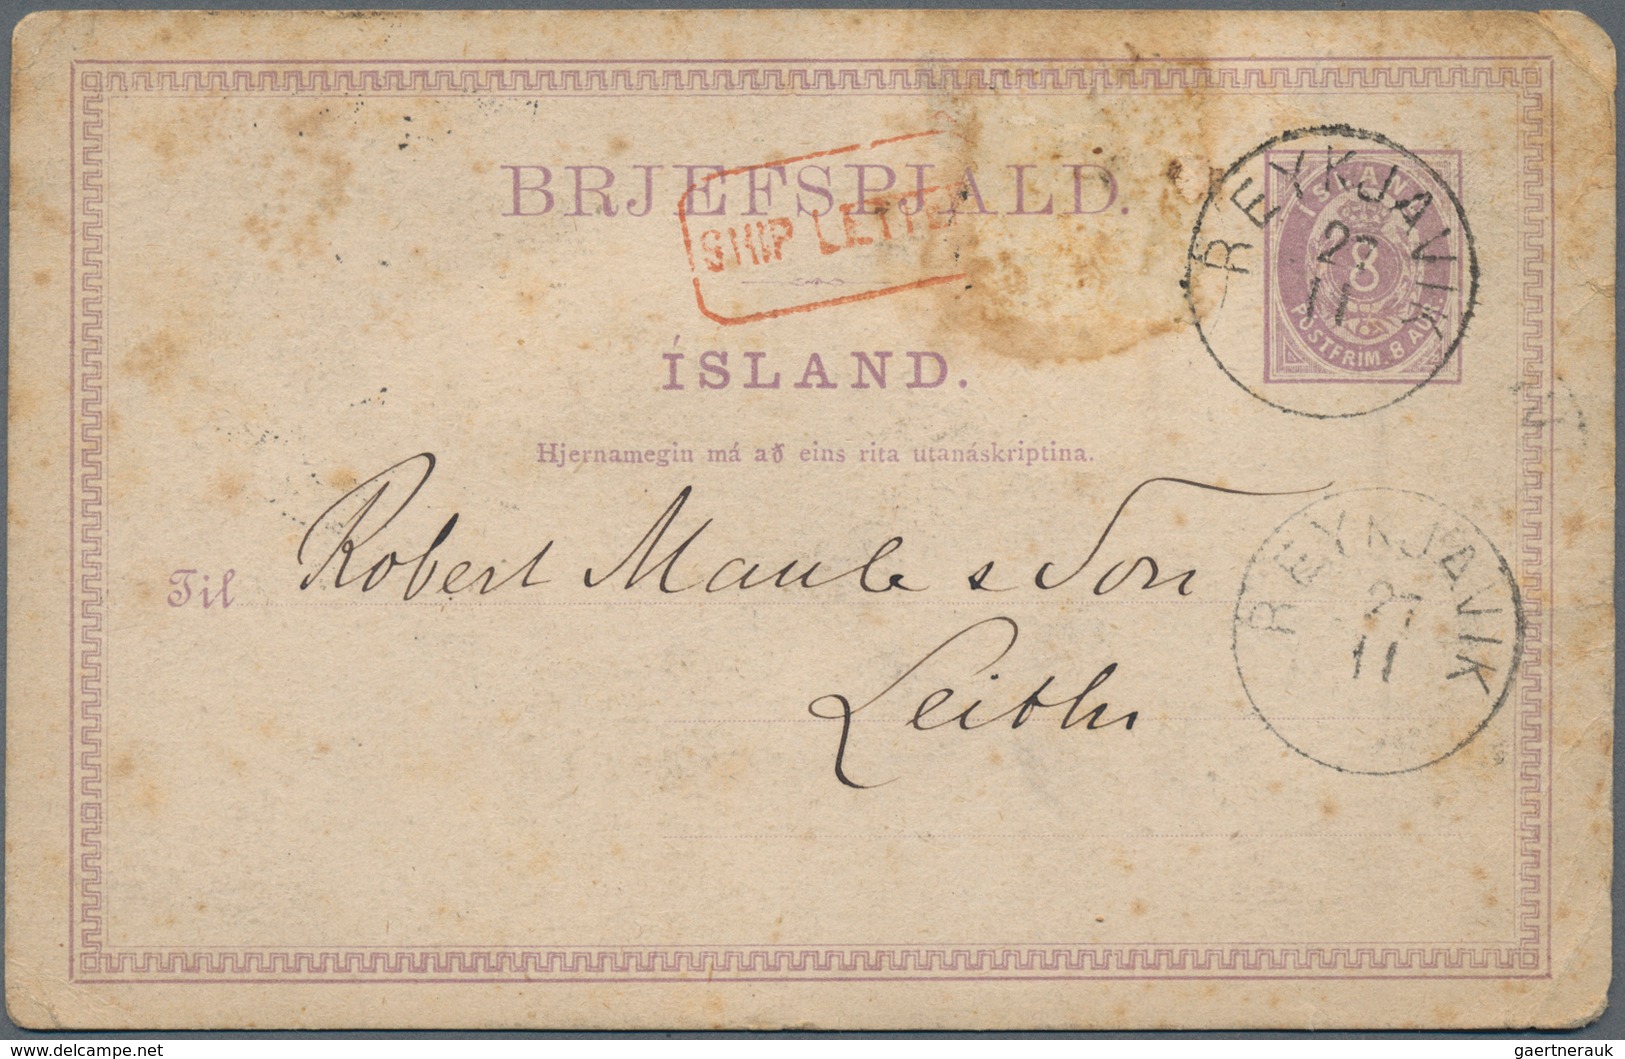 Island - Ganzsachen: 1880 Postal Stationery Card 8a. Lilac, Used From Reykjavik To Leith, England In - Entiers Postaux